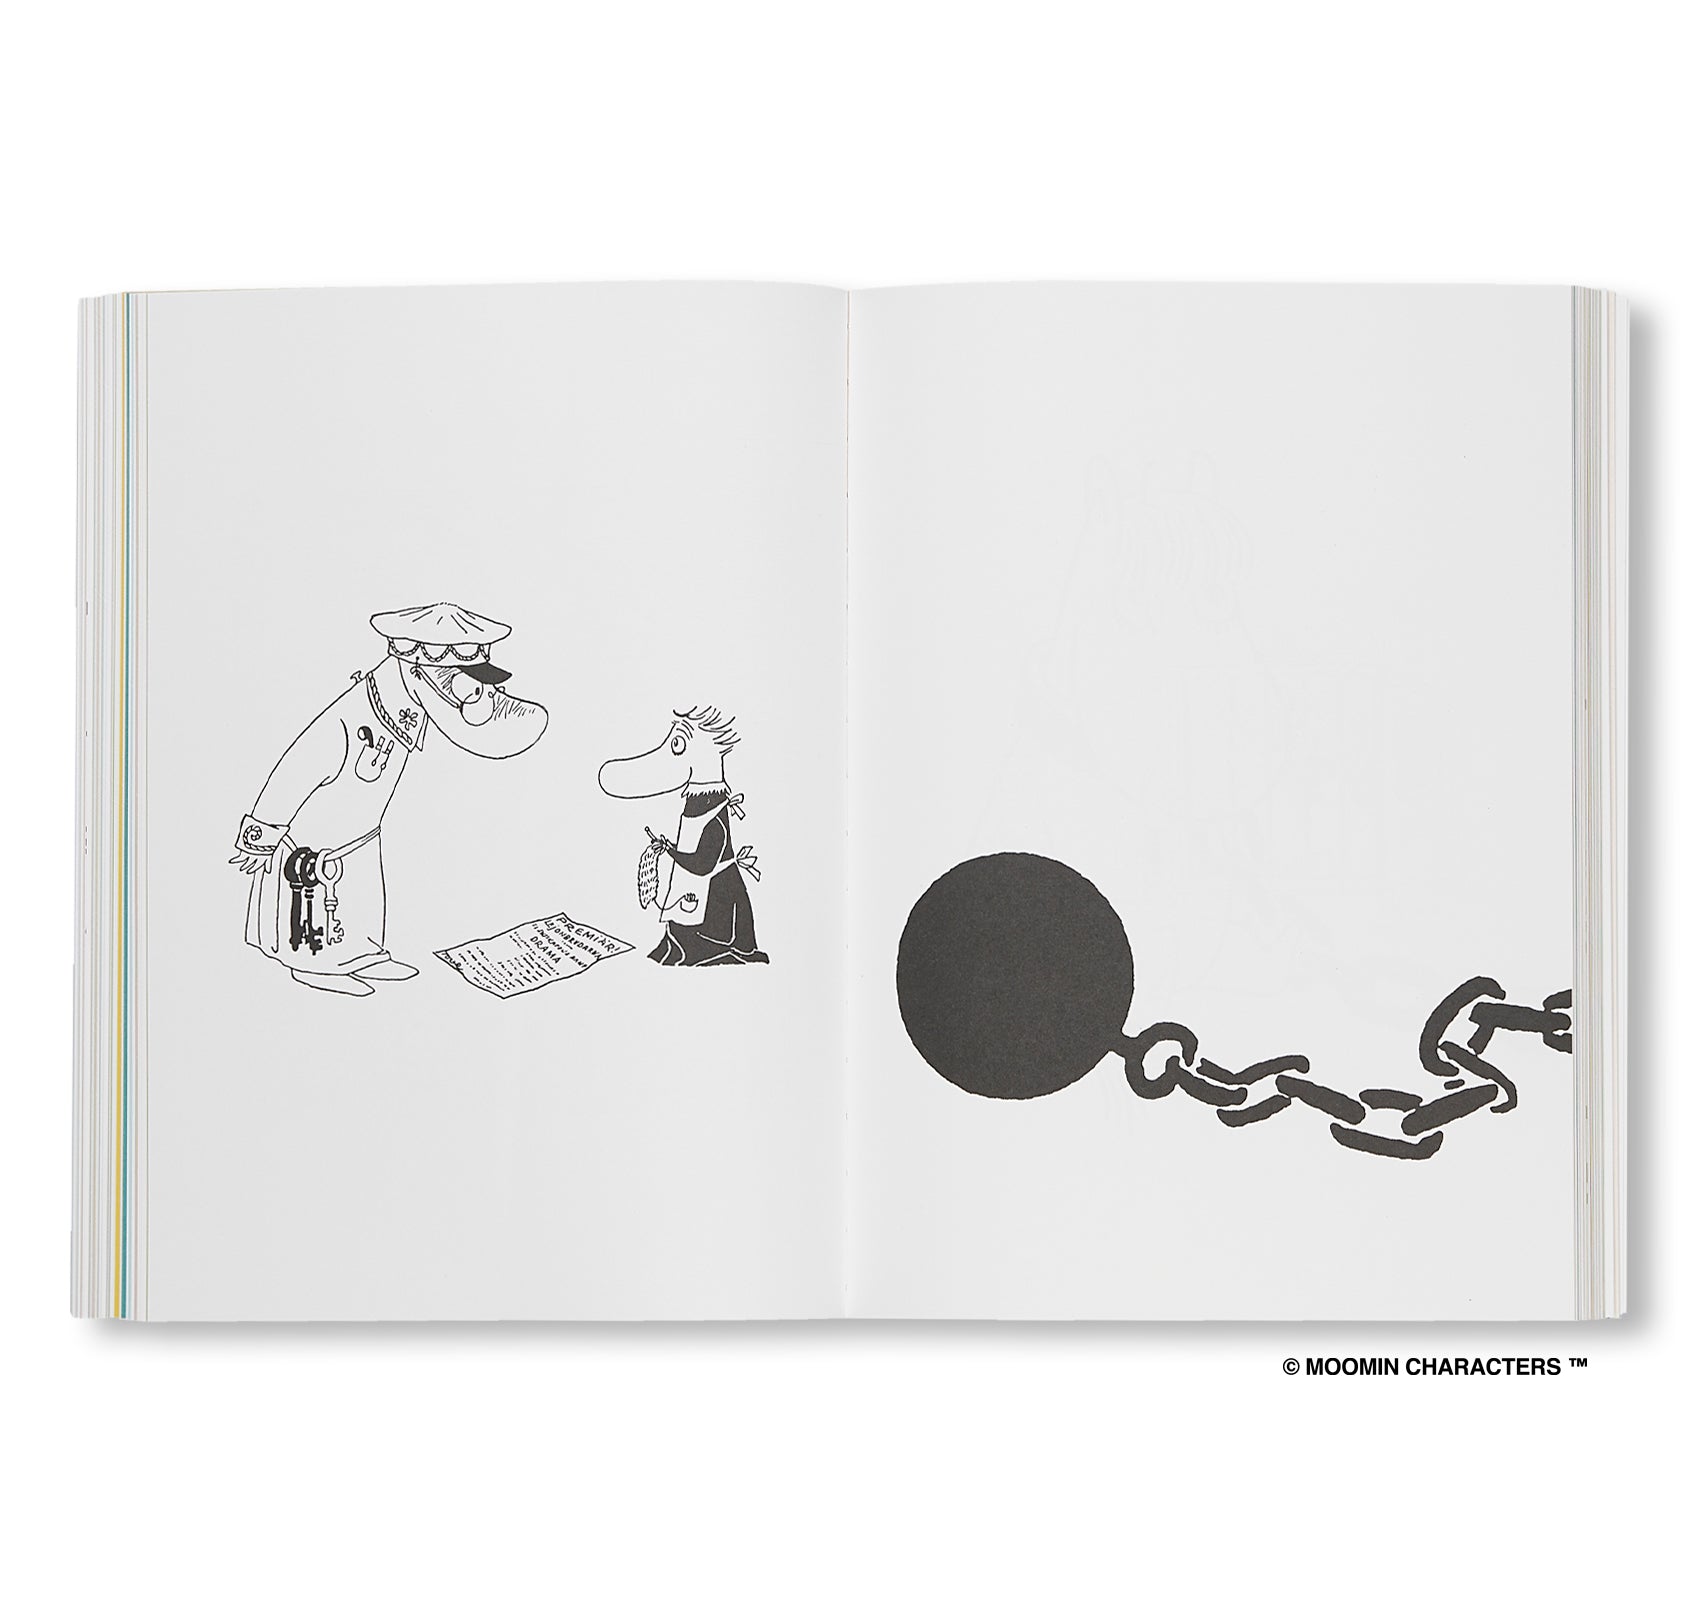 MOOMIN MISCHIEVOUS NATURE by Tove Marika Jansson [SOFTCOVER]